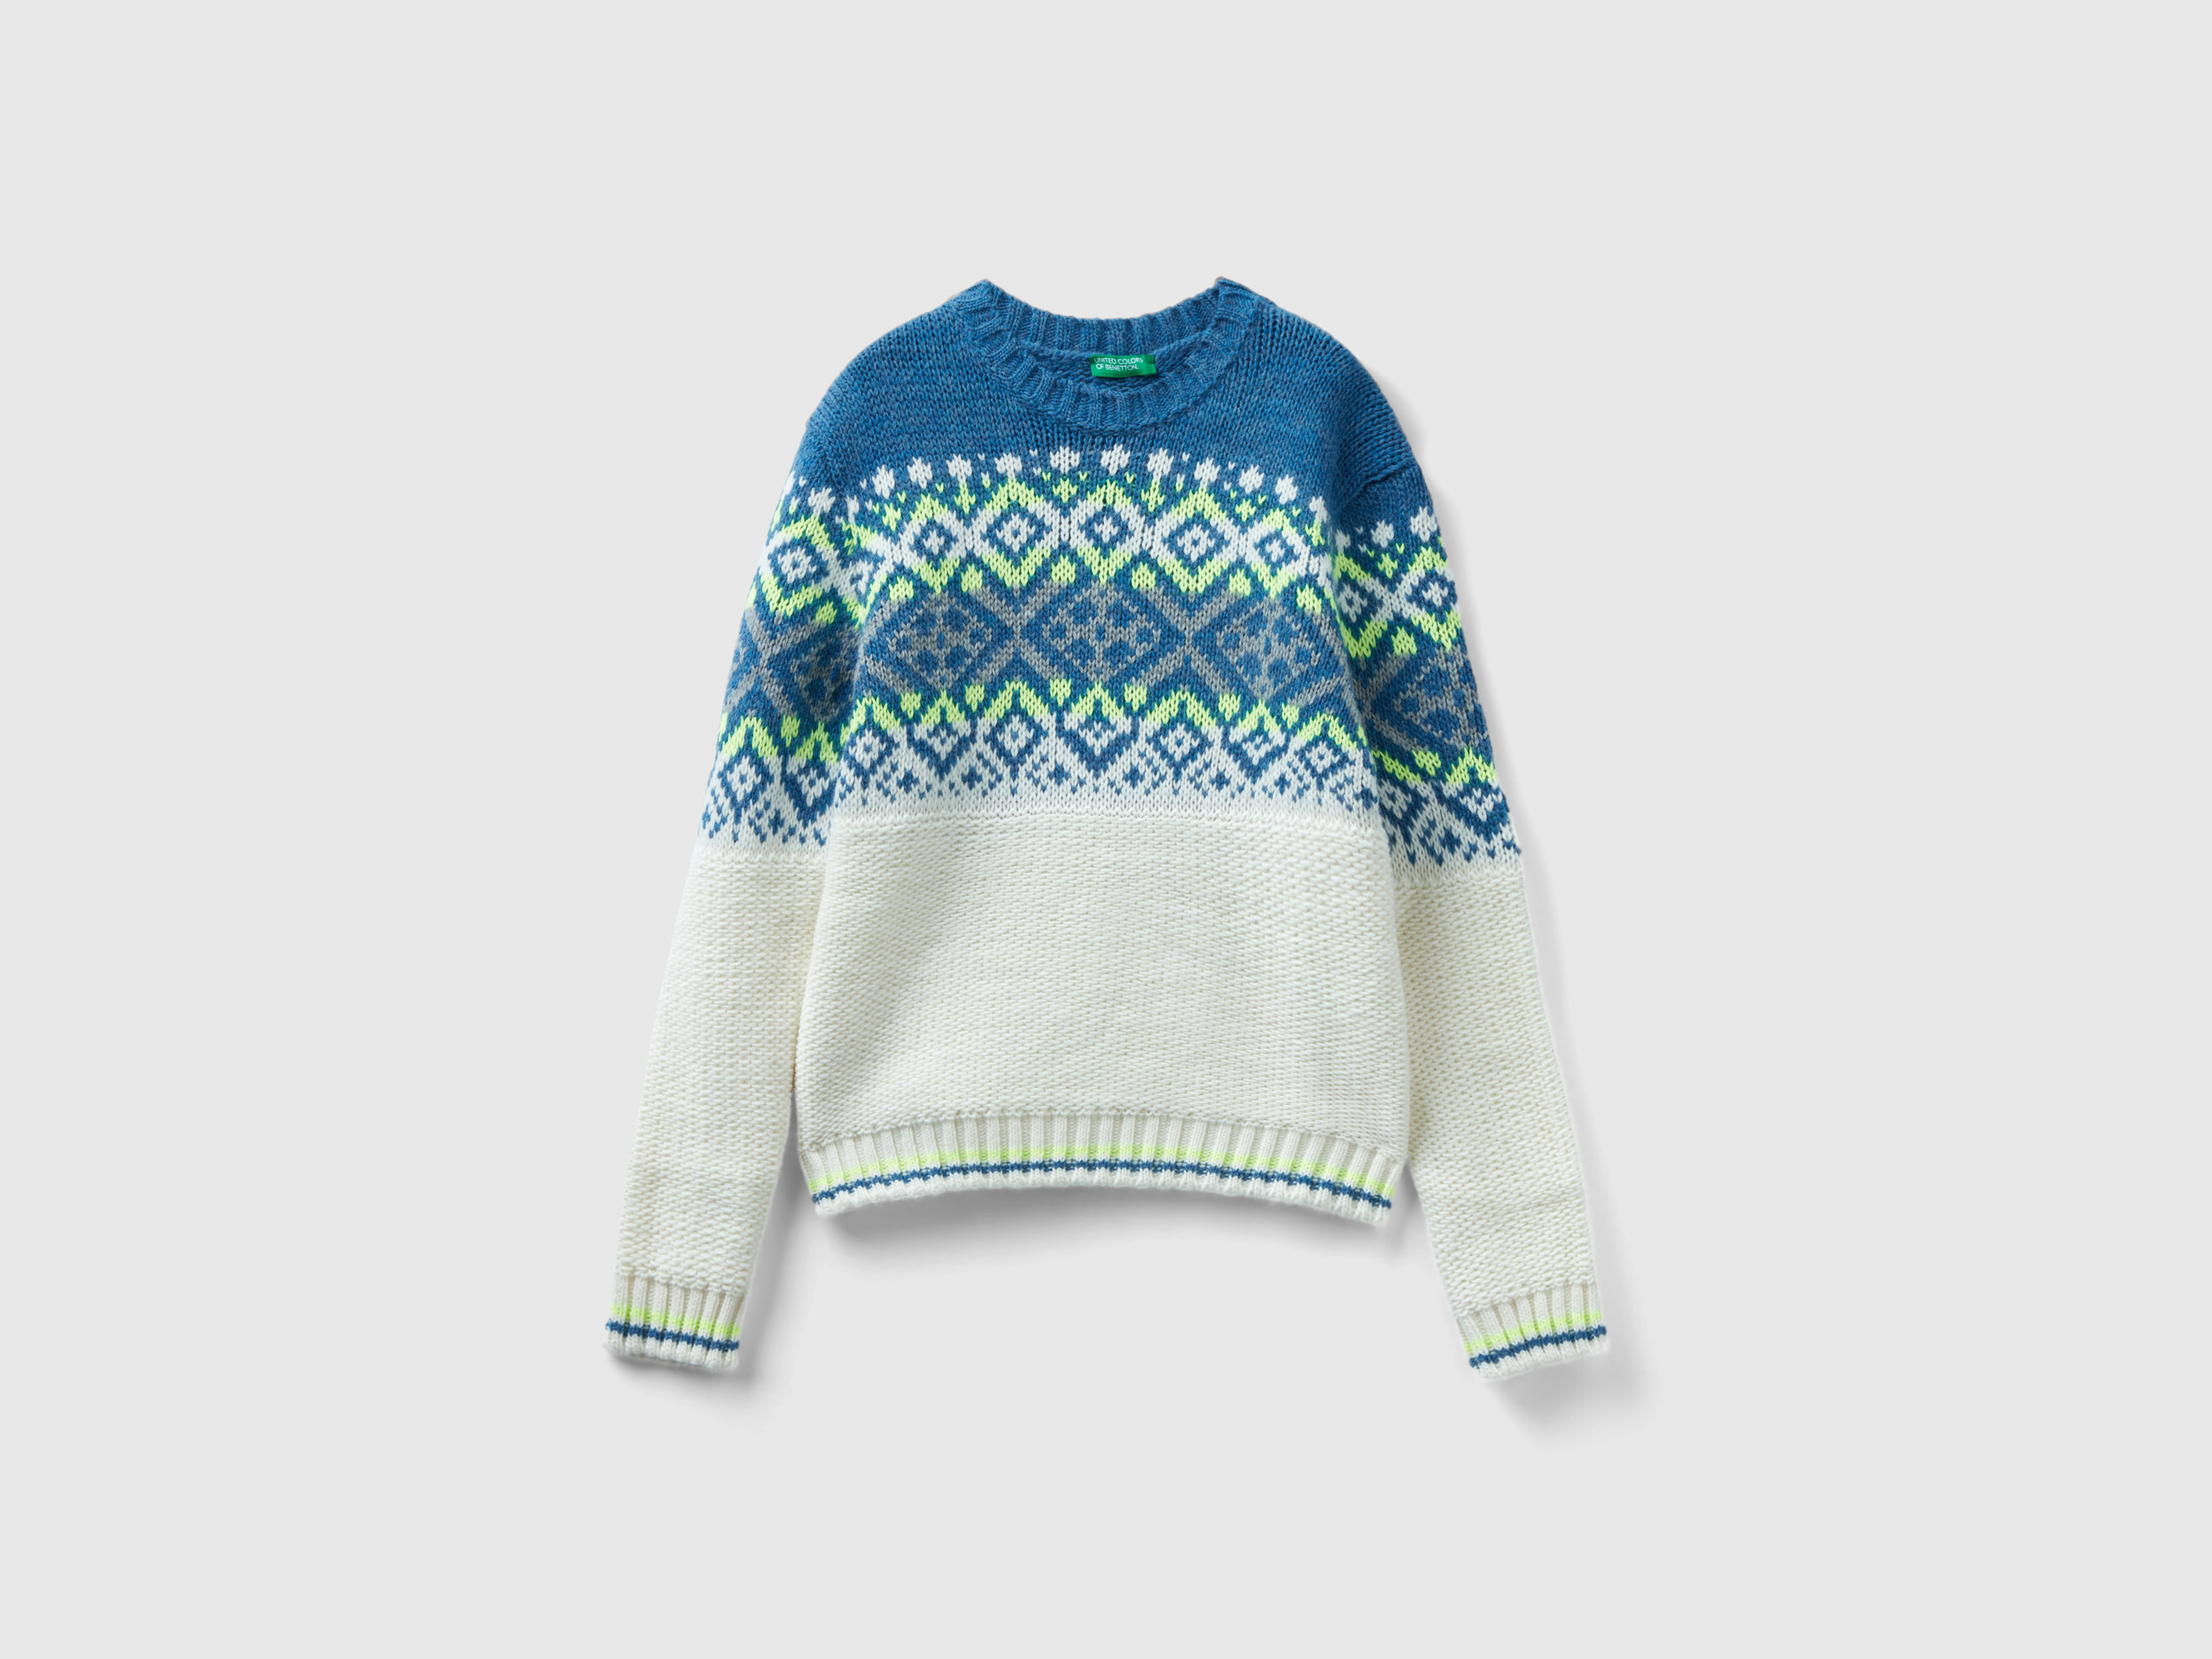 Benetton, Jacquard Sweater With Neon Details, size 3XL, Multi-color, Kids